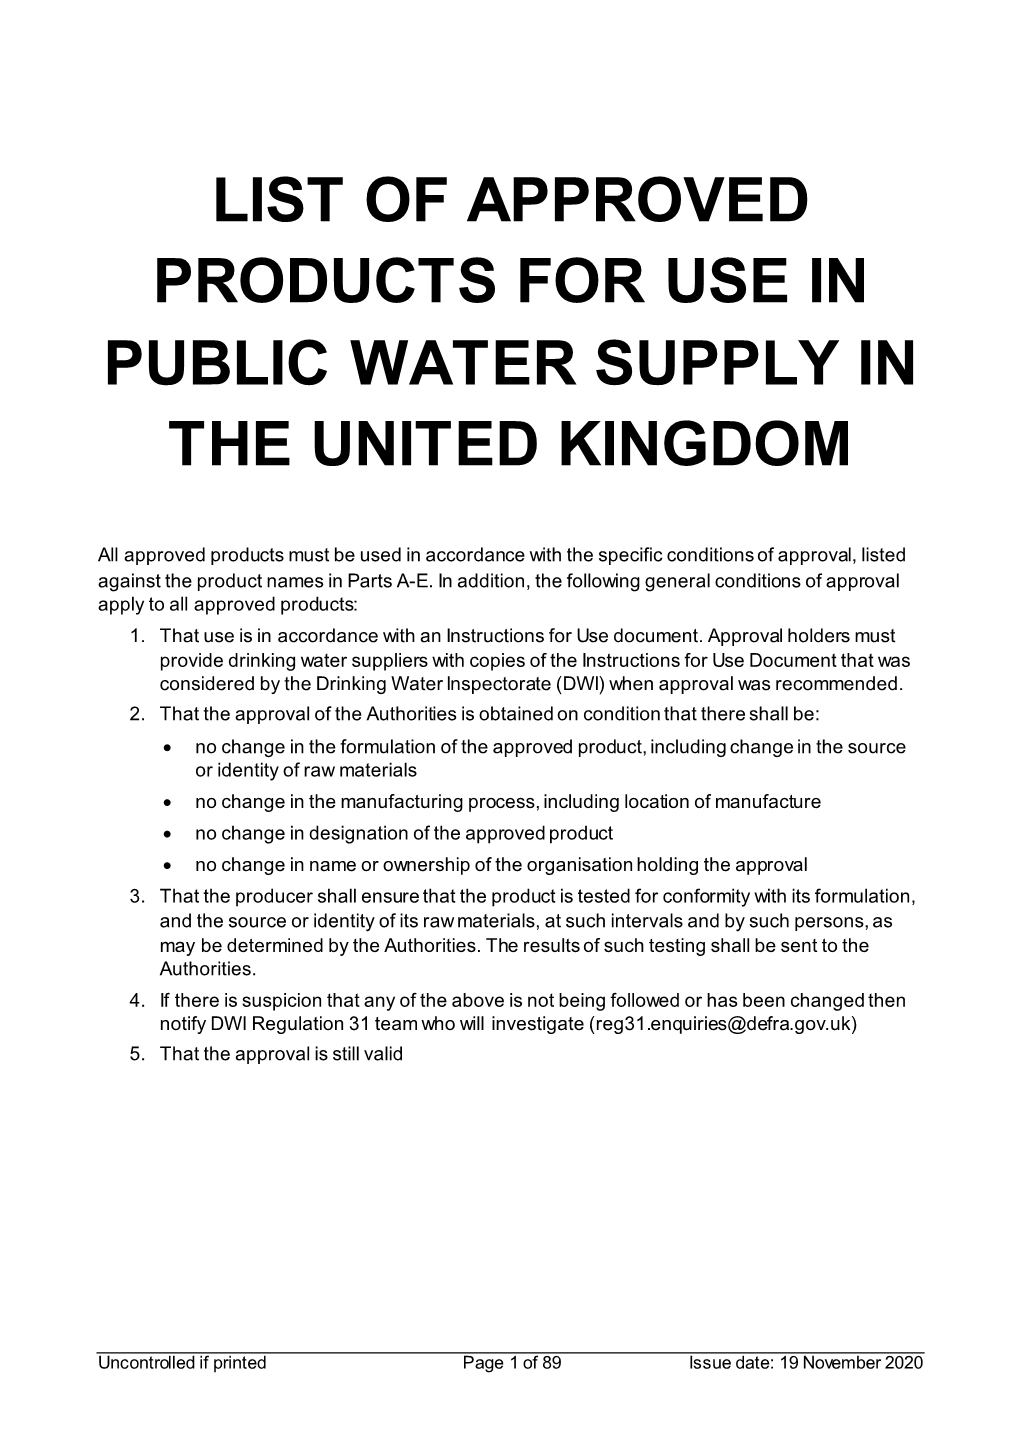 List of Approved Products for Use in Public Water Supply in the United Kingdom